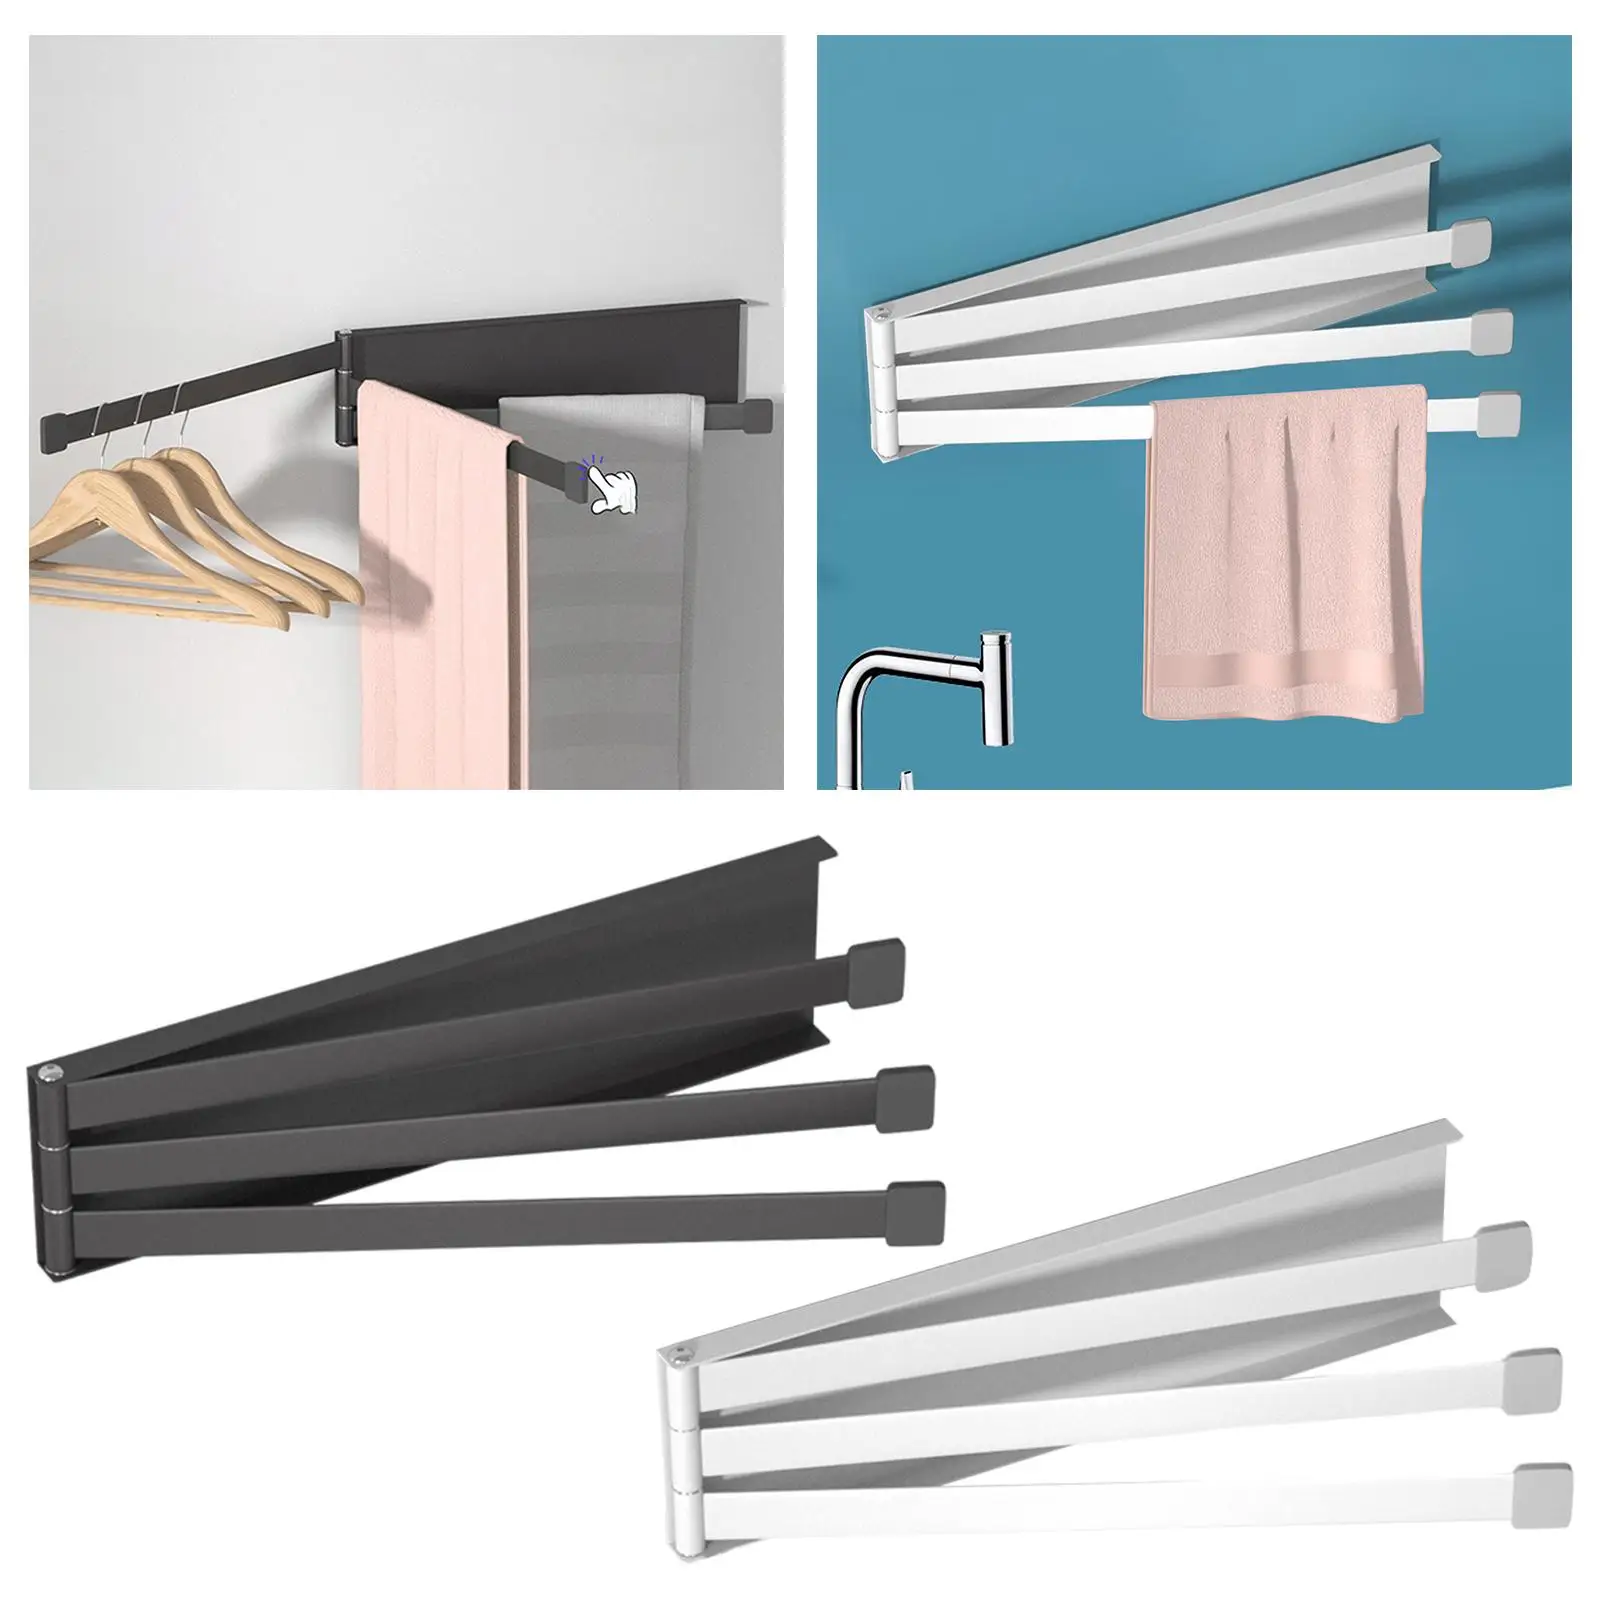 Swivel Towel Bar Hanger Organizer 180 Rotation Wall Mounted Rail Steel with 3 Arms Holder Rack for Bathroom Accessories Kitchen